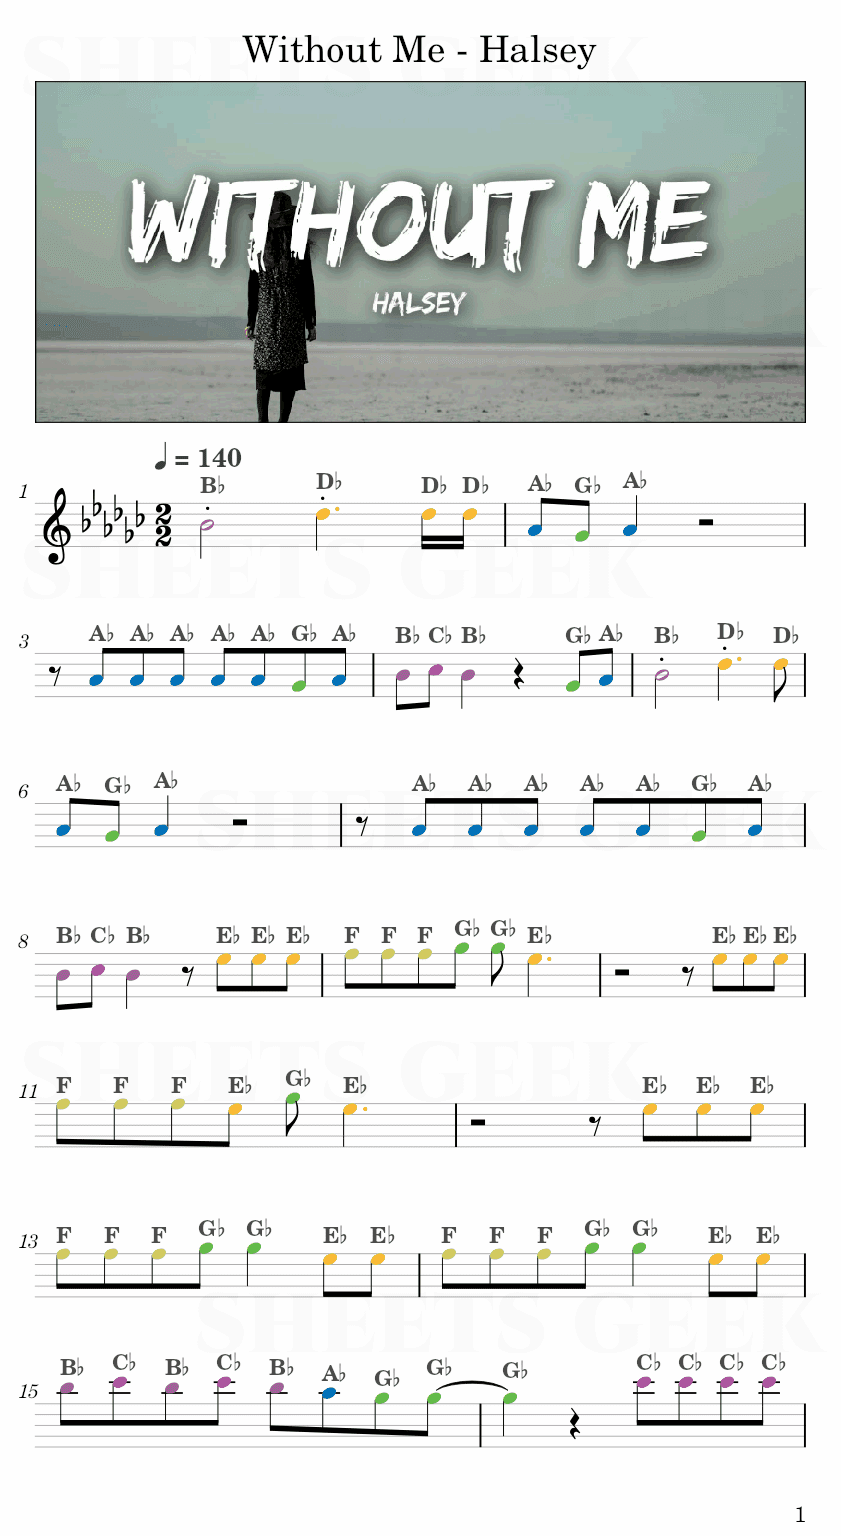 Without Me - Halsey Easy Sheet Music Free for piano, keyboard, flute, violin, sax, cello page 1